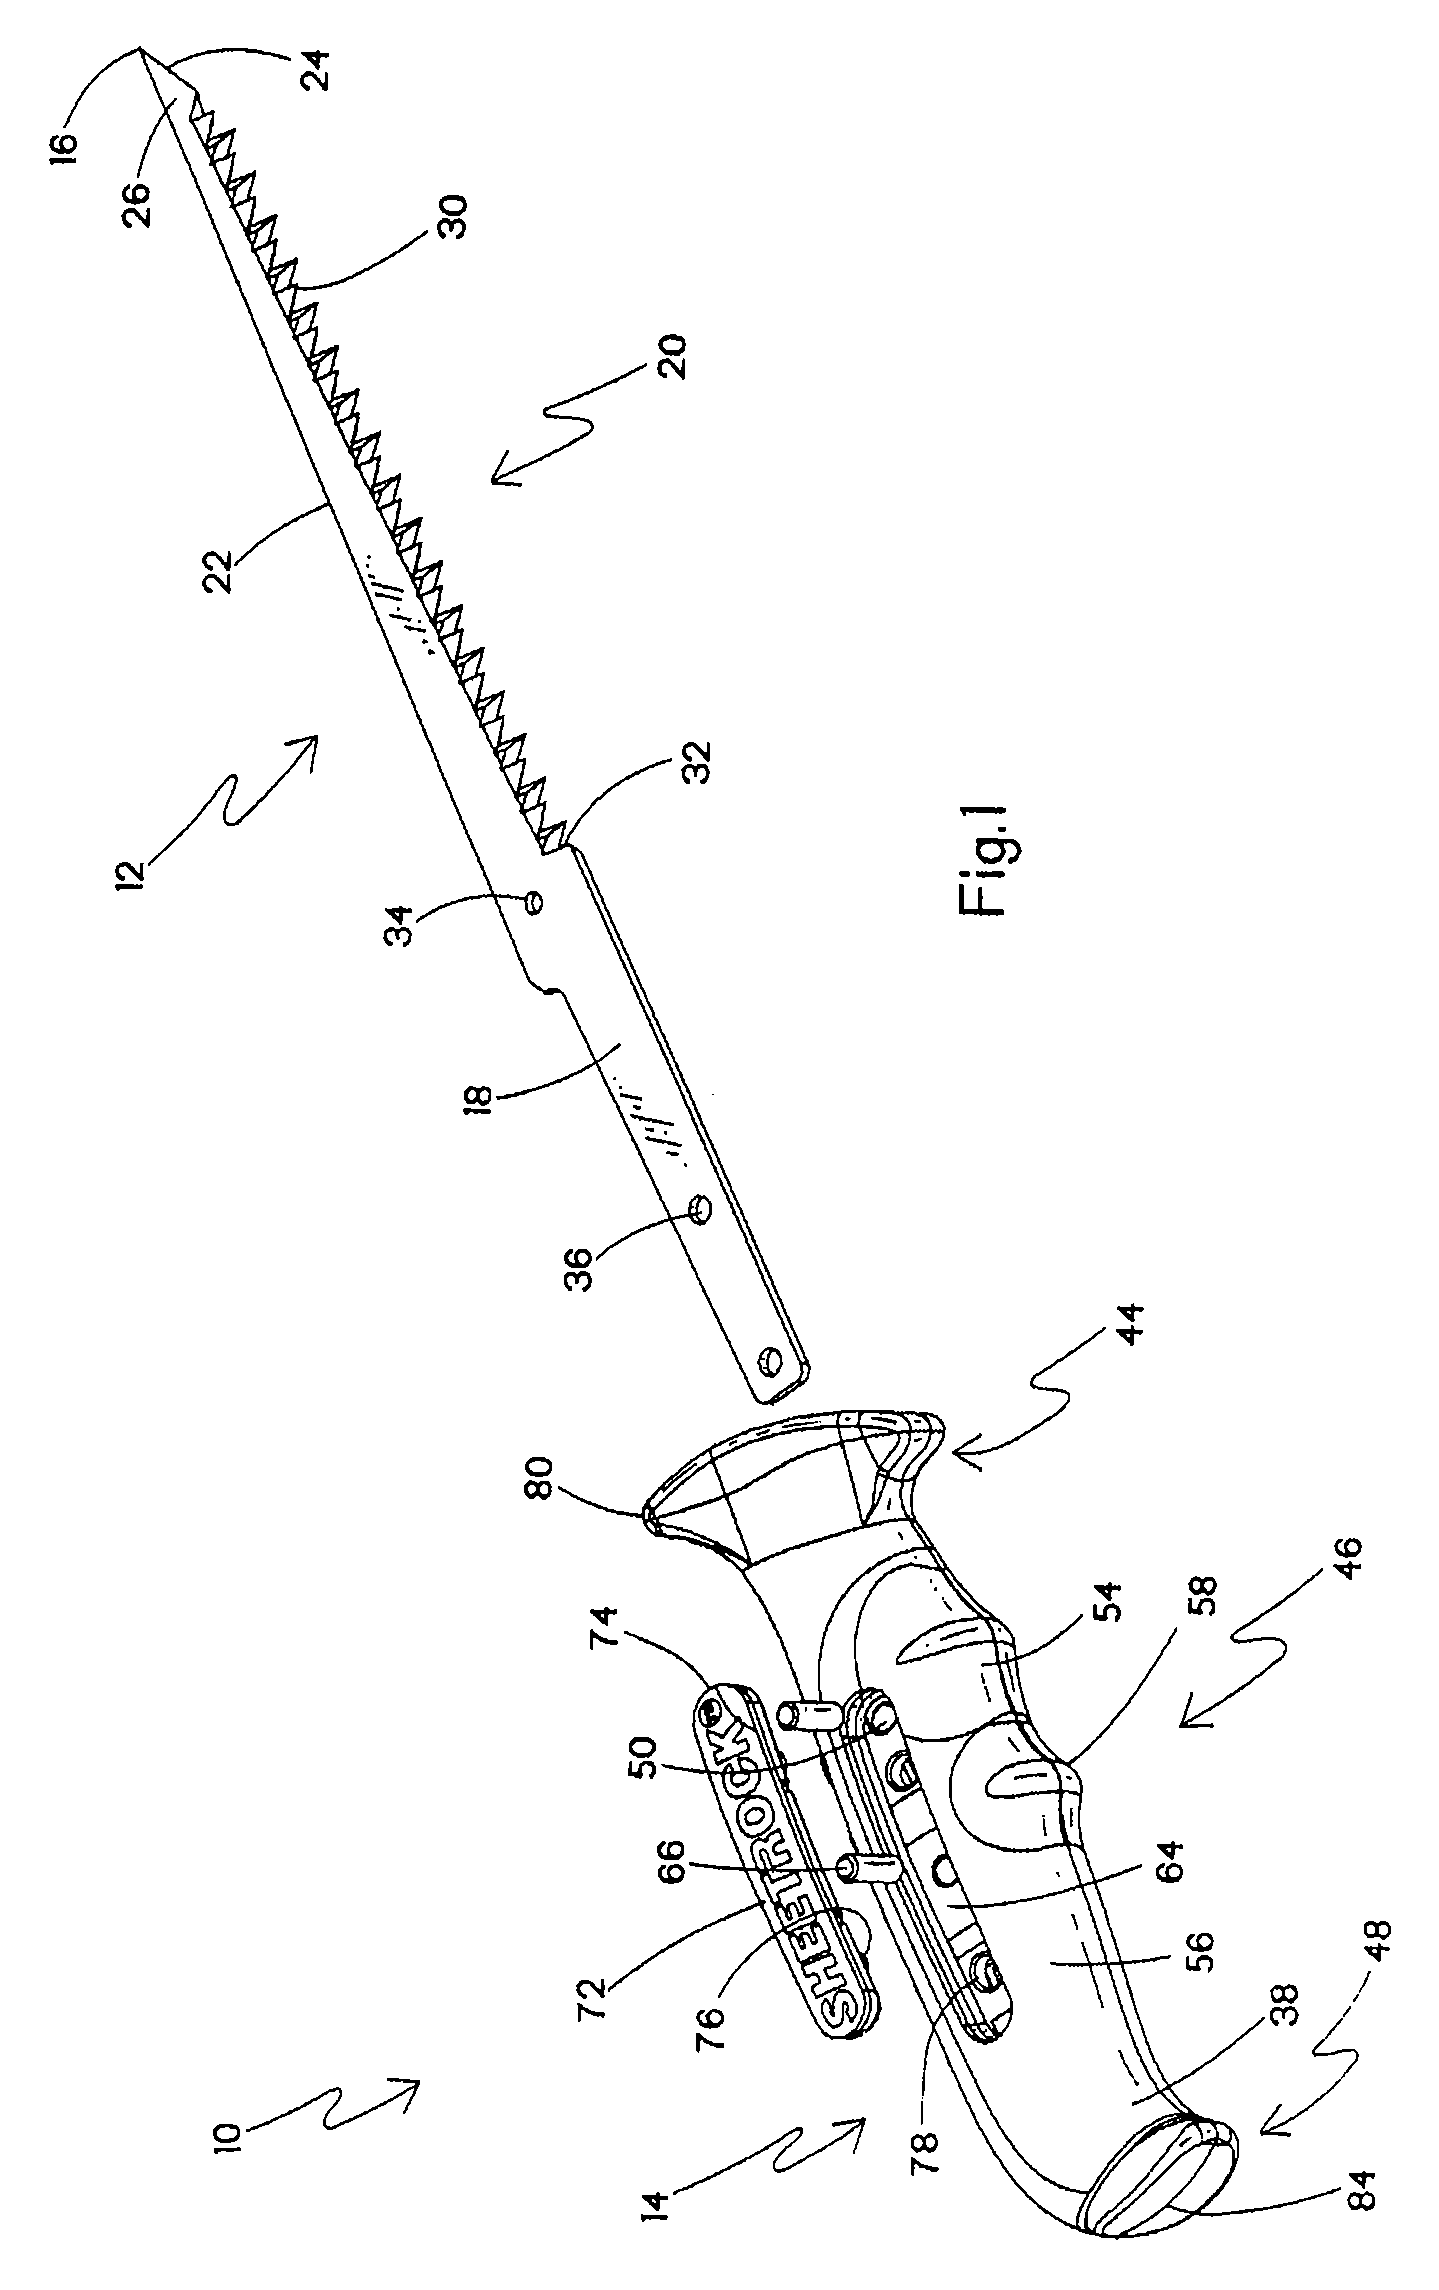 Jab saw with accessible internal fastening location